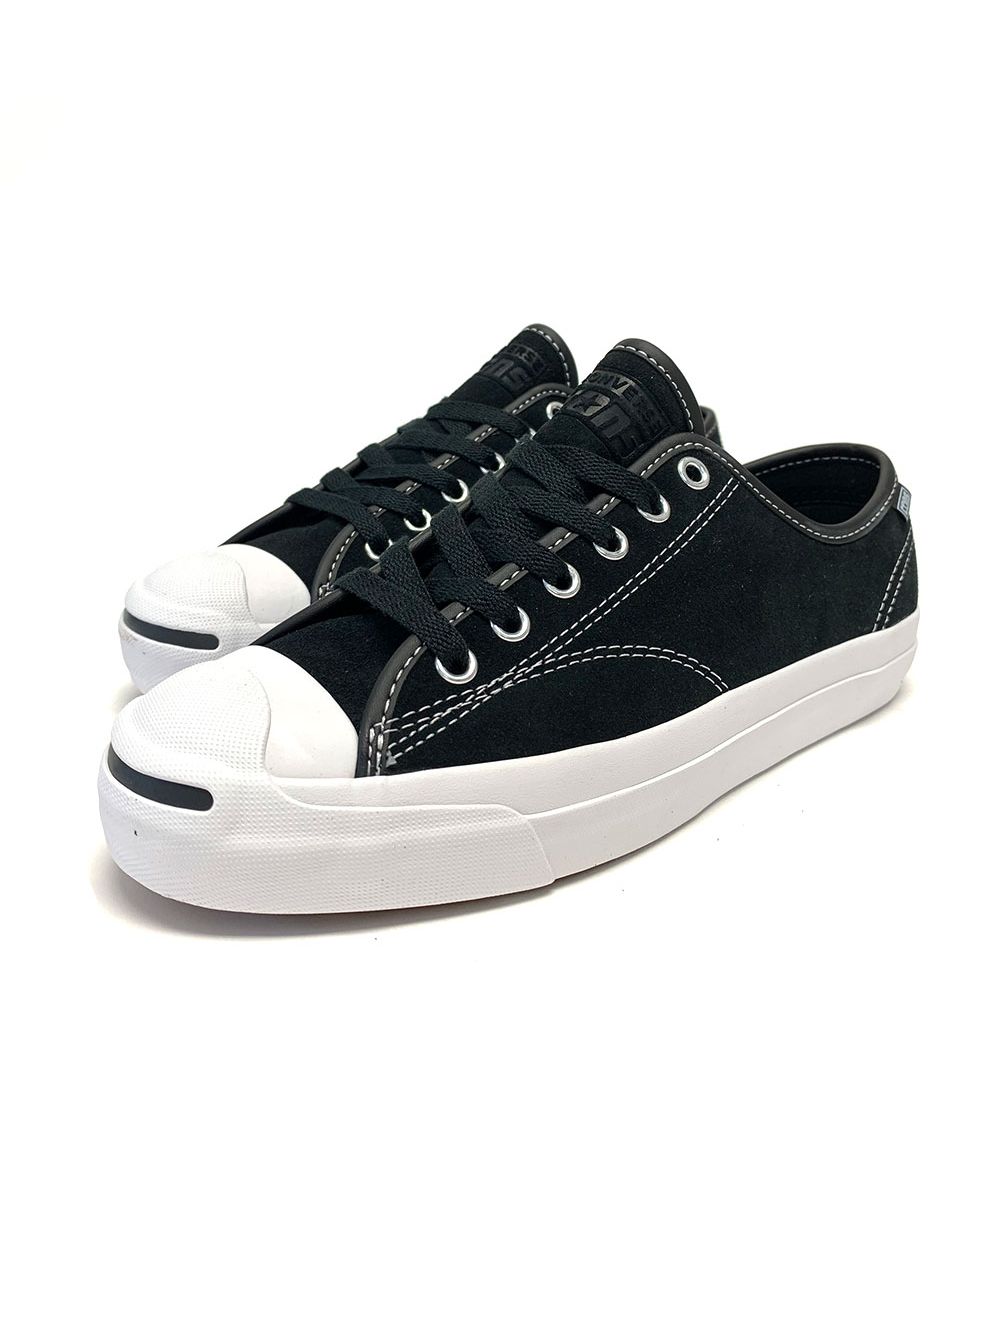 Converse Cons. Jack Purcell Pro. Black. &